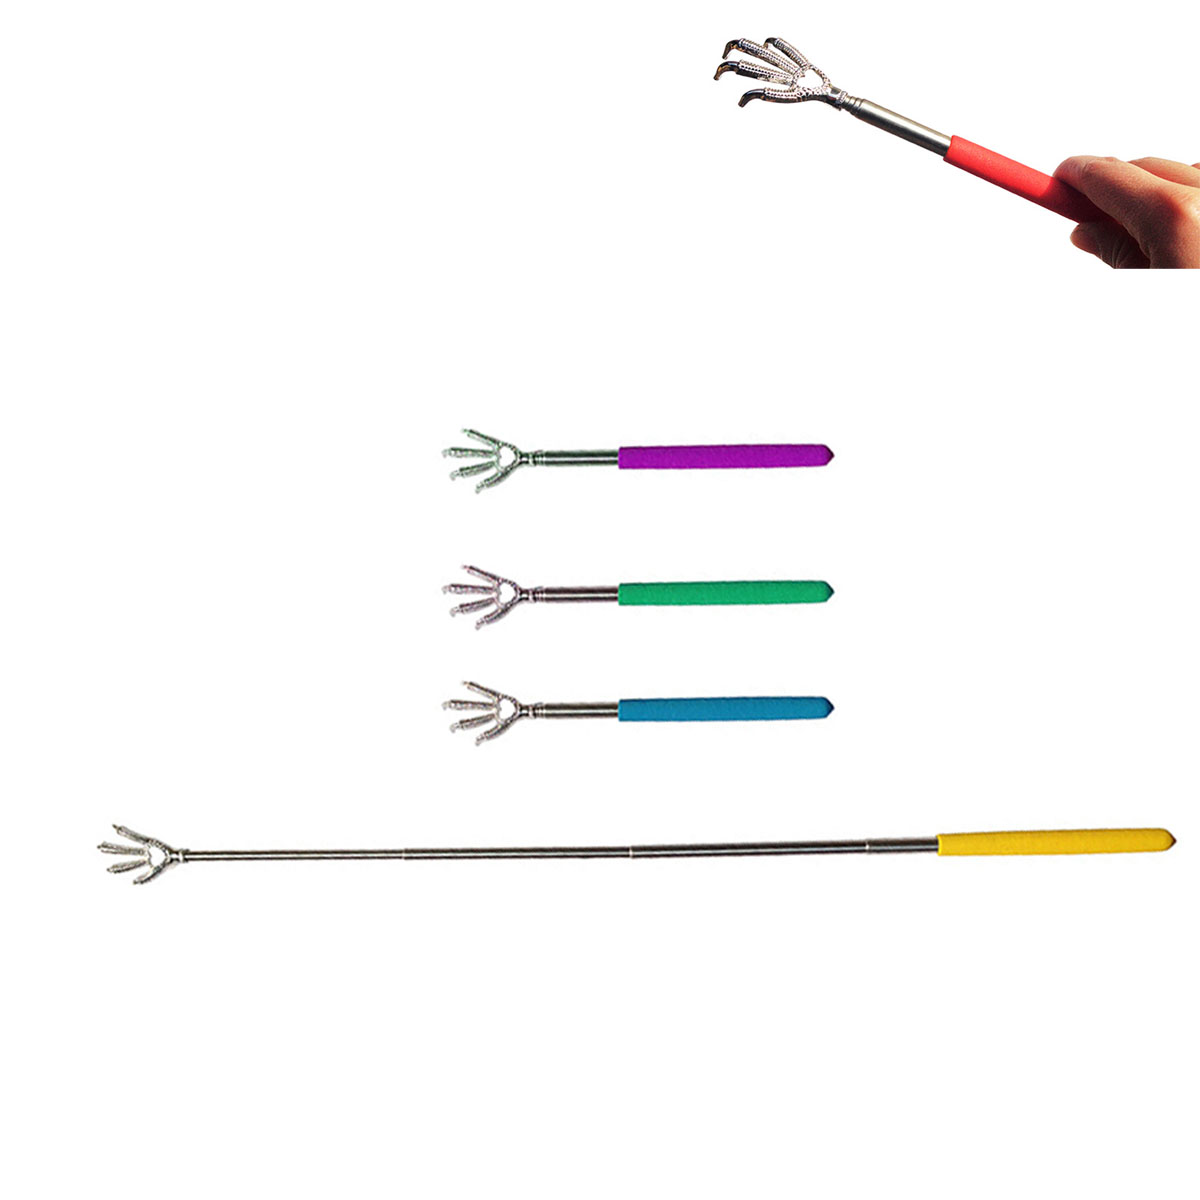 GL-AAJ1064 Telescoping Hand Back Scratcher with Metal Eagle Claw